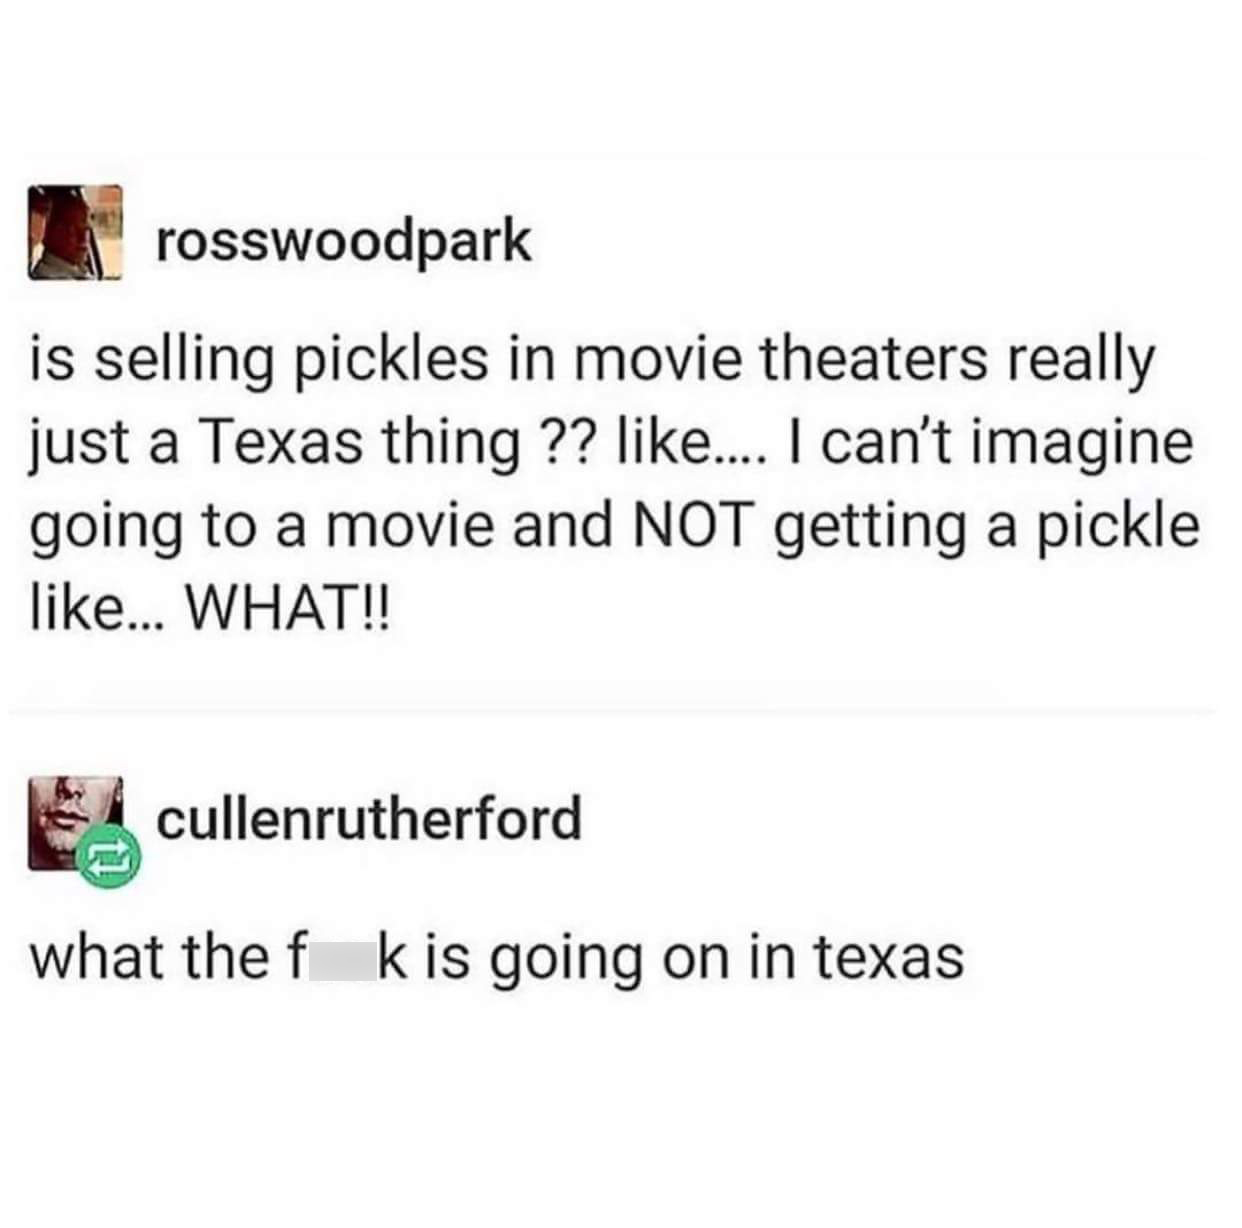 Pickles in movie theatres in Texas